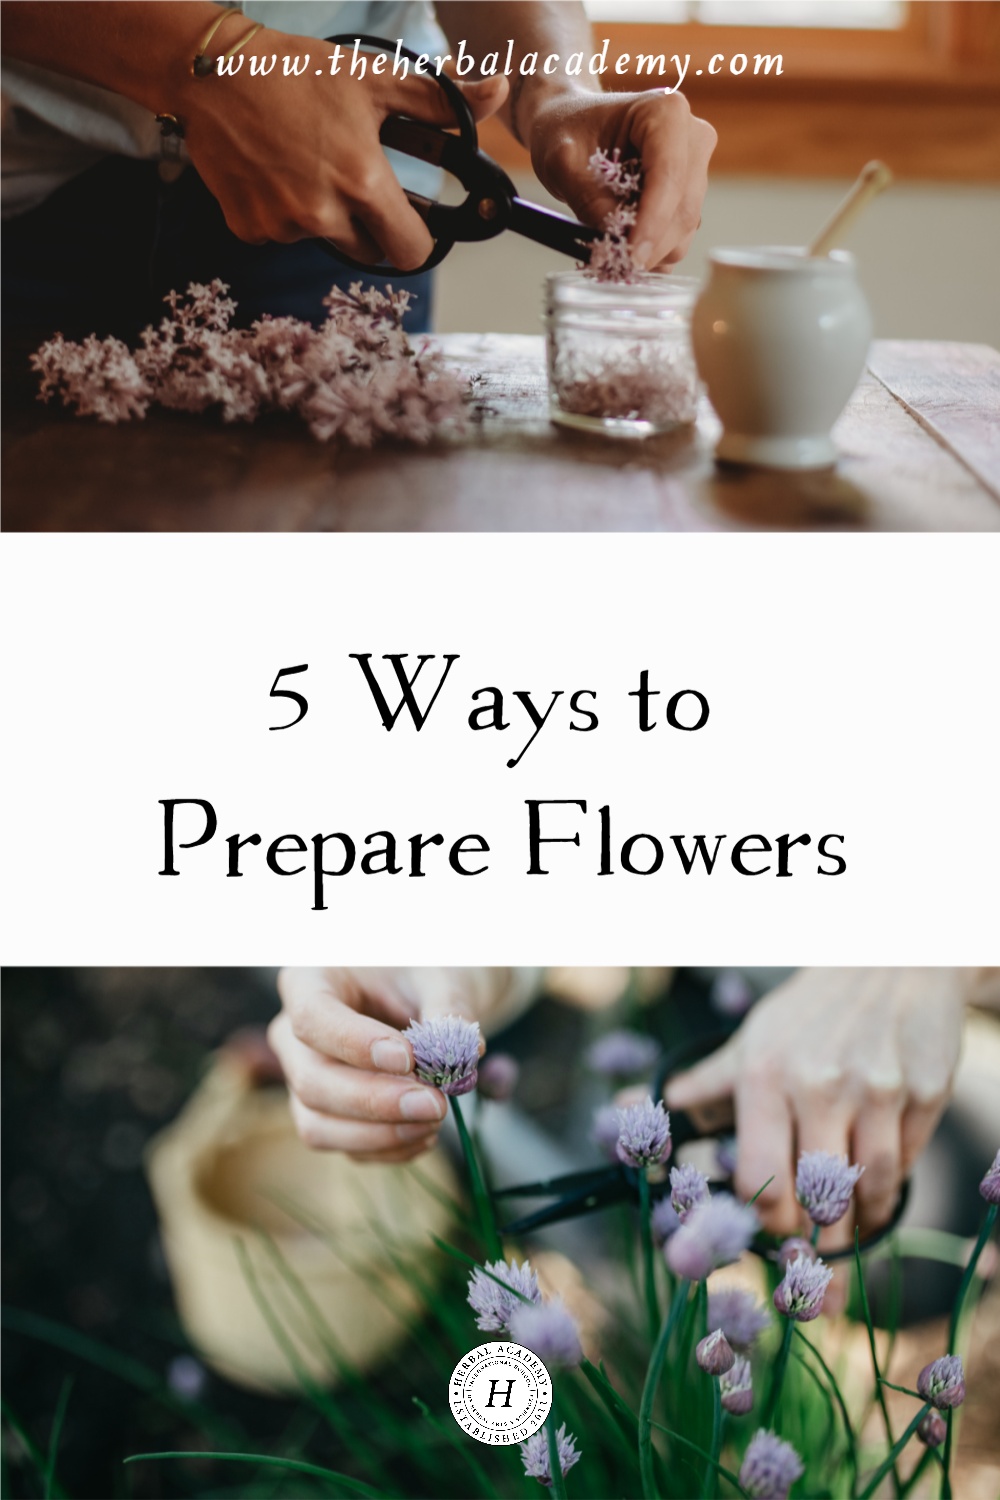 5 Ways to Prepare Flowers | Herbal Academy | Edible flowers are lovely on the side of the plate, but there are numerous creative ways to prepare flowers and add in meals and beverages.